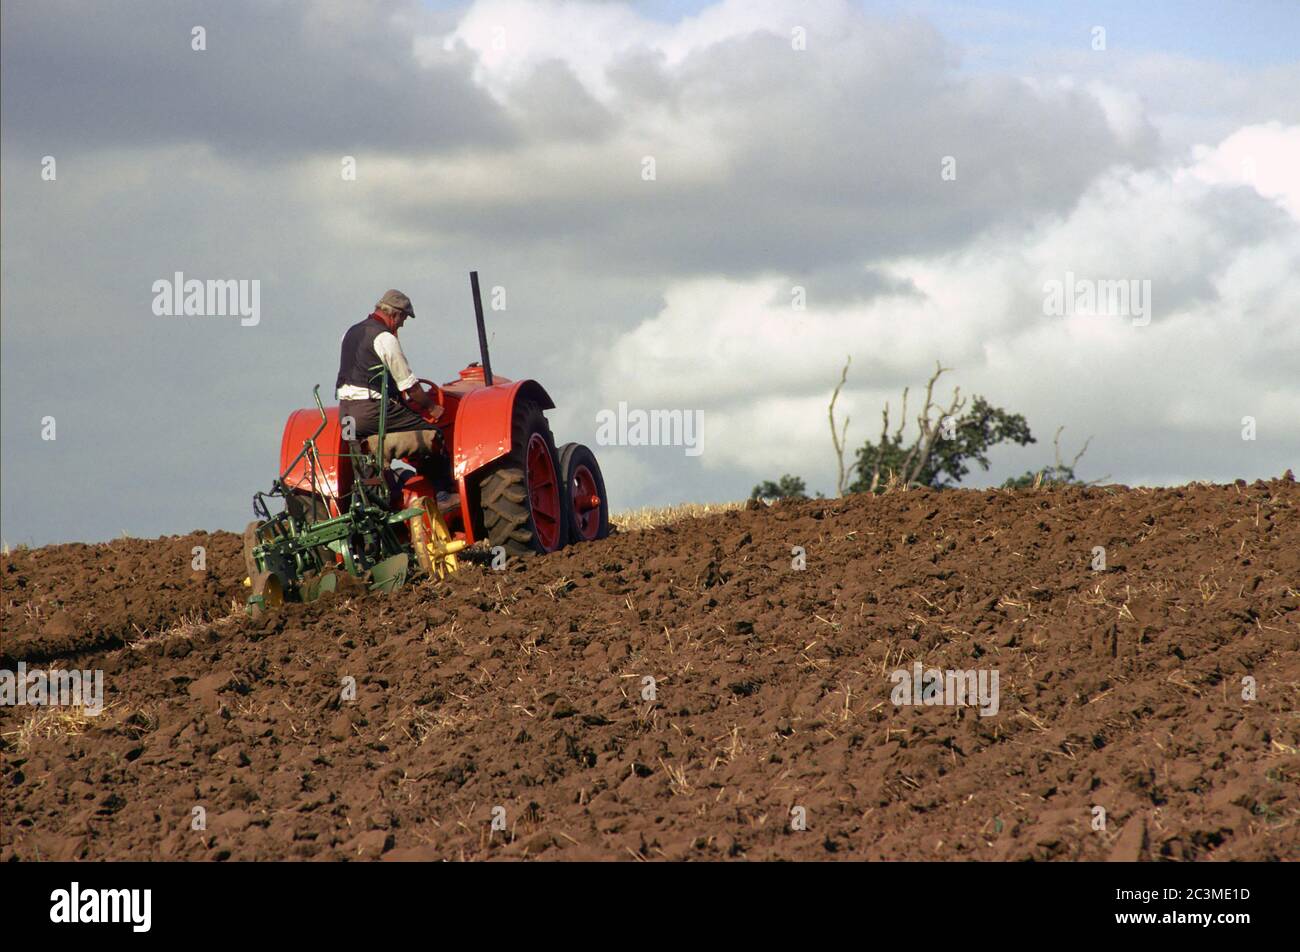 A 1940s Fordson tractor demonstrates ploughing at a show in Bedfordshire, England. Stock Photo